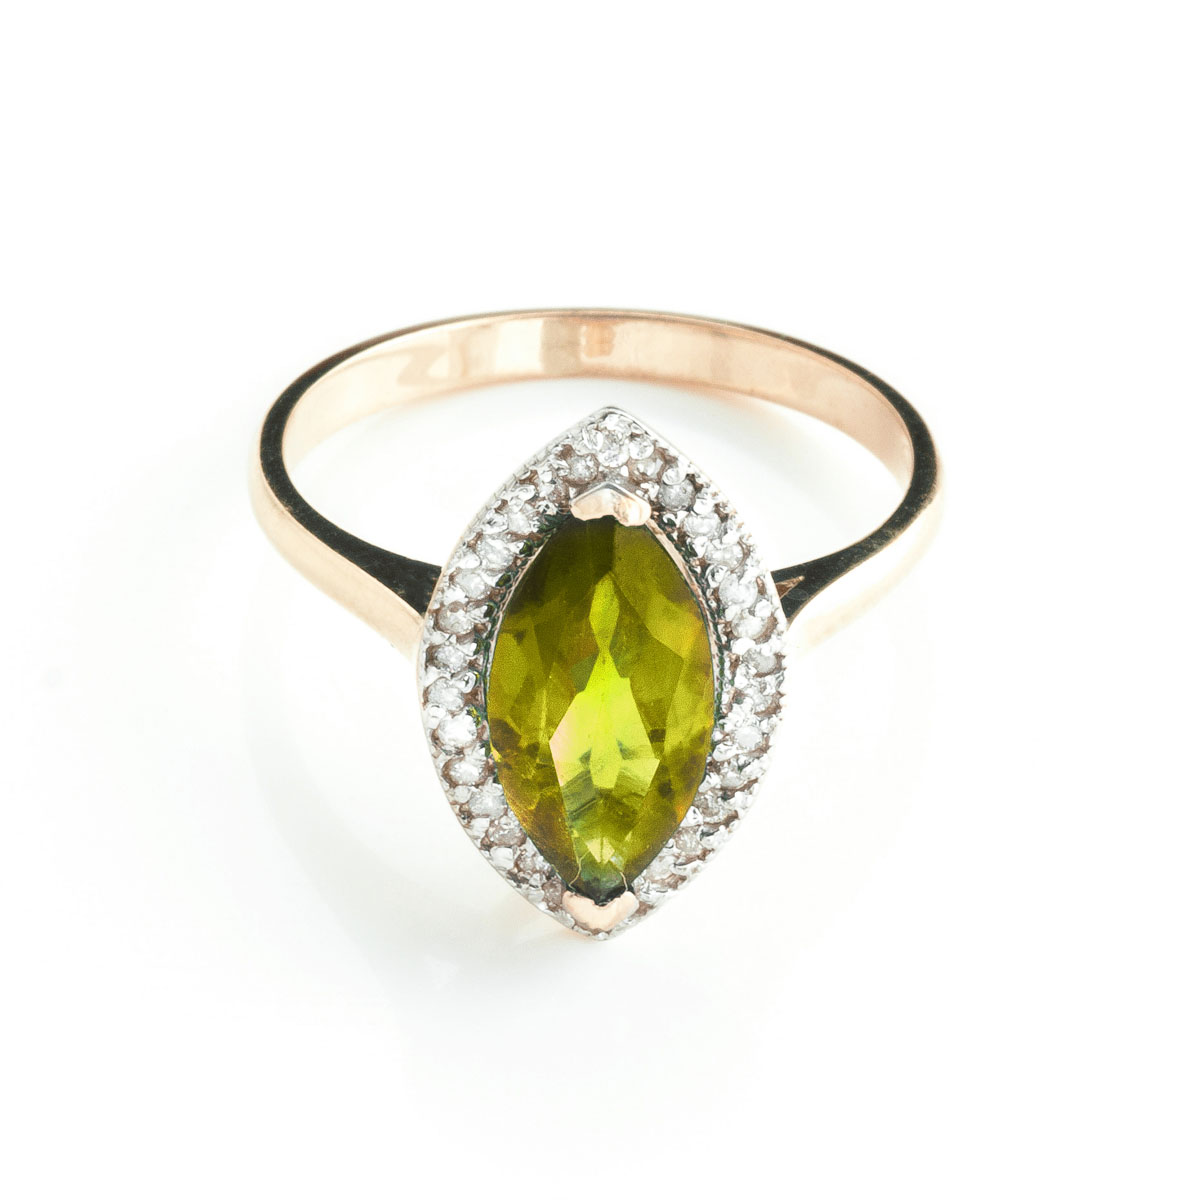 Peridot Halo Ring 2.15 ctw in 9ct Rose Gold